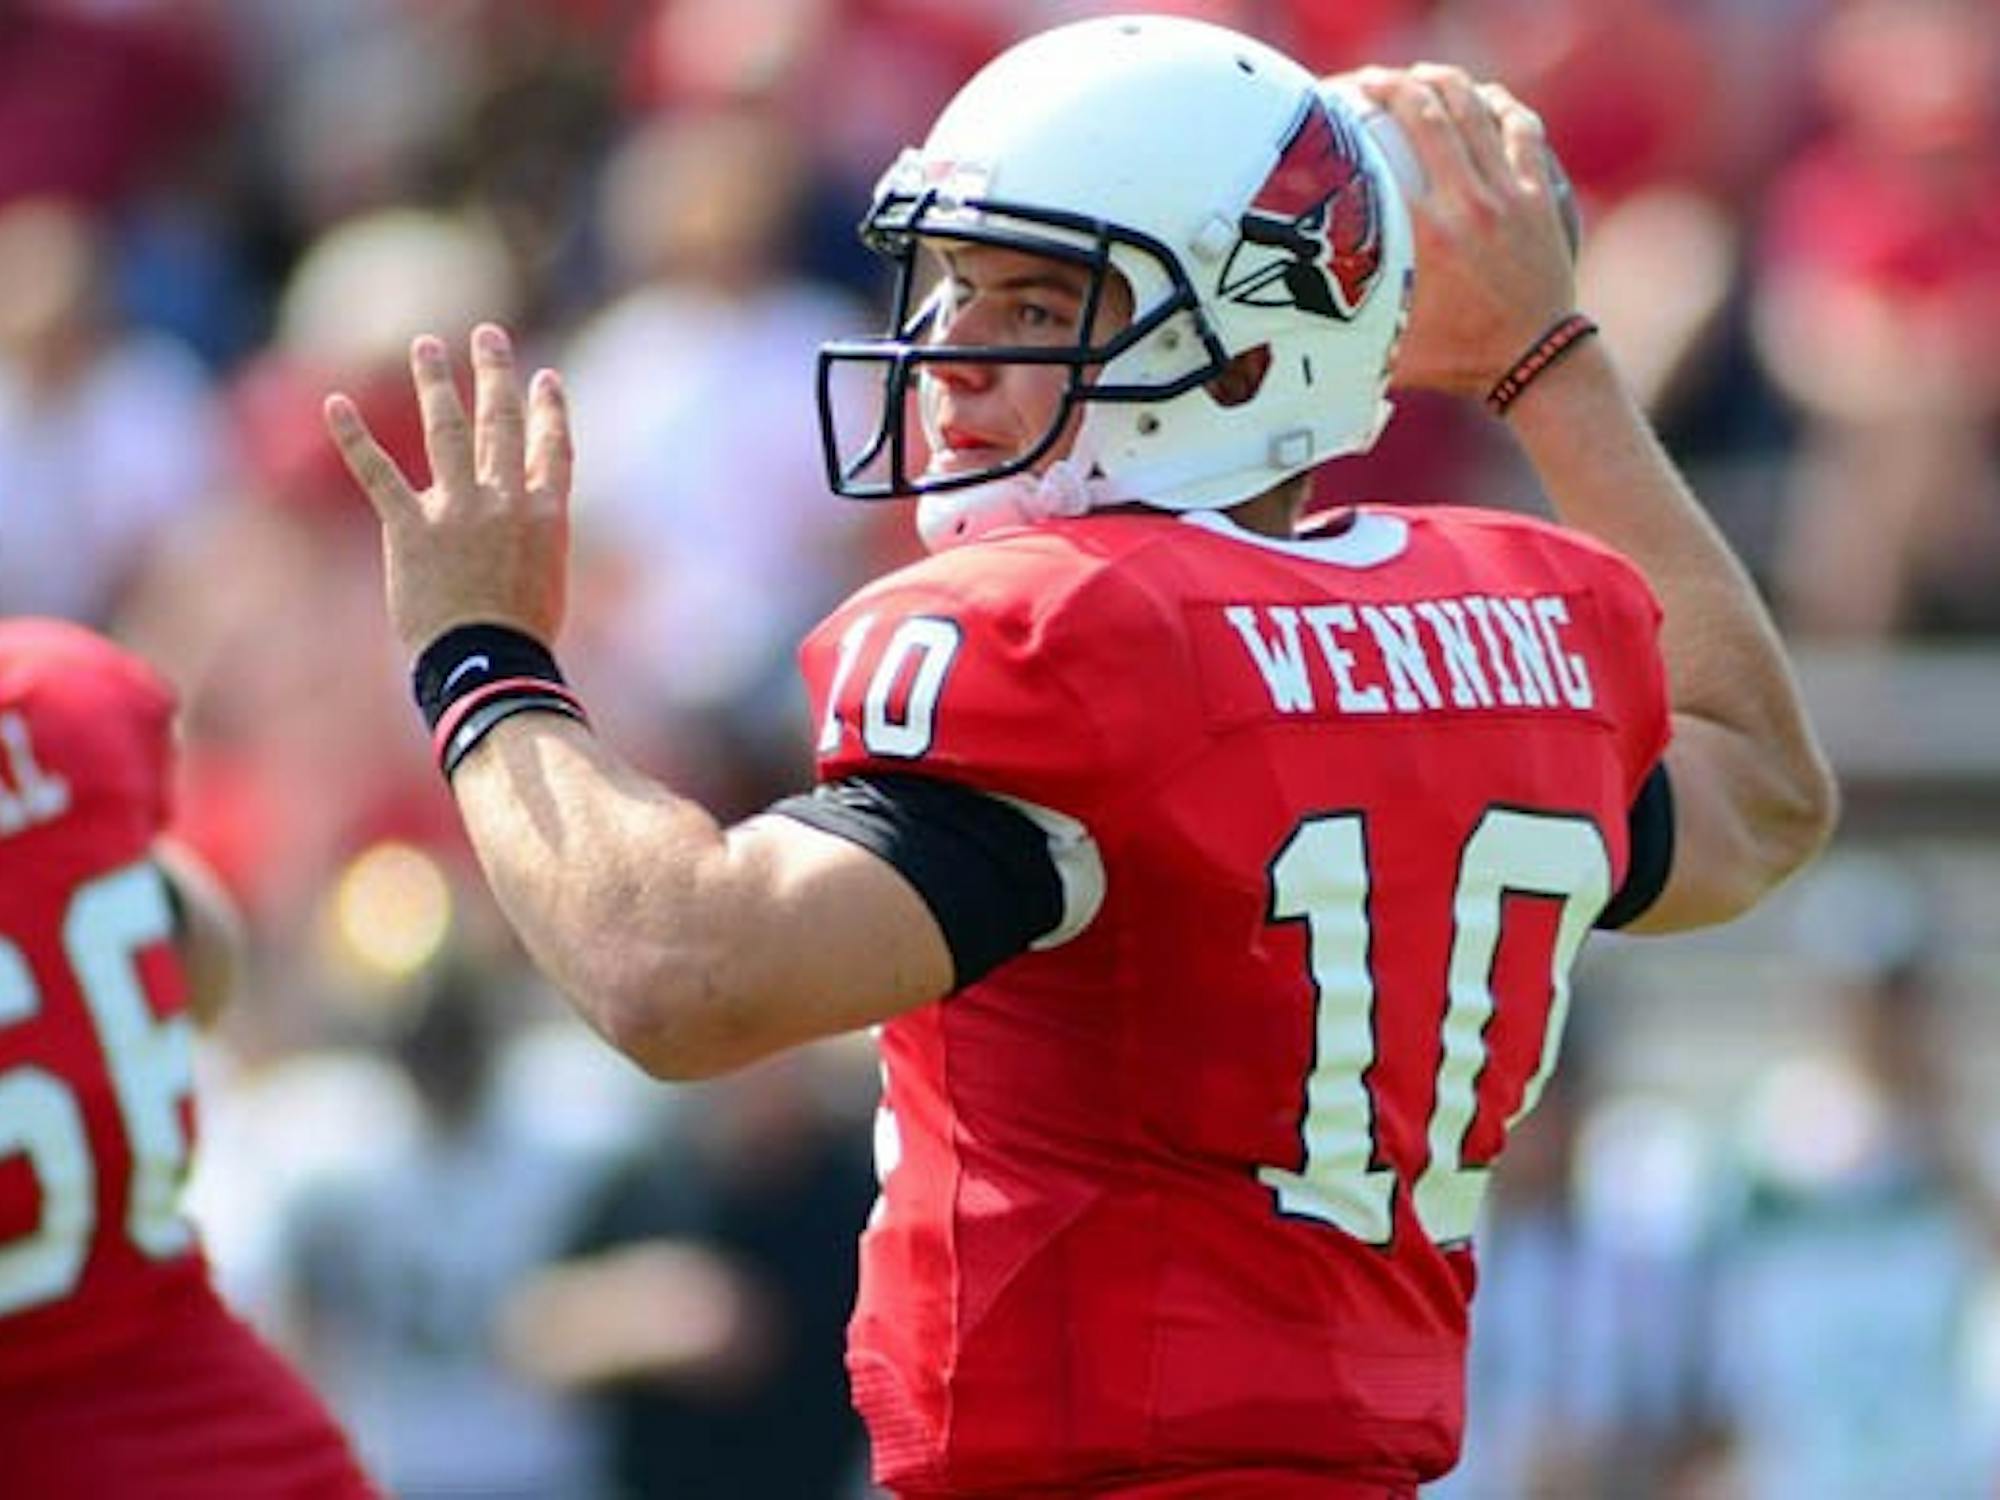 	Ball State quarterback Keith Wenning has passed for 998 yards this season, the best in the Mid-American Conference.